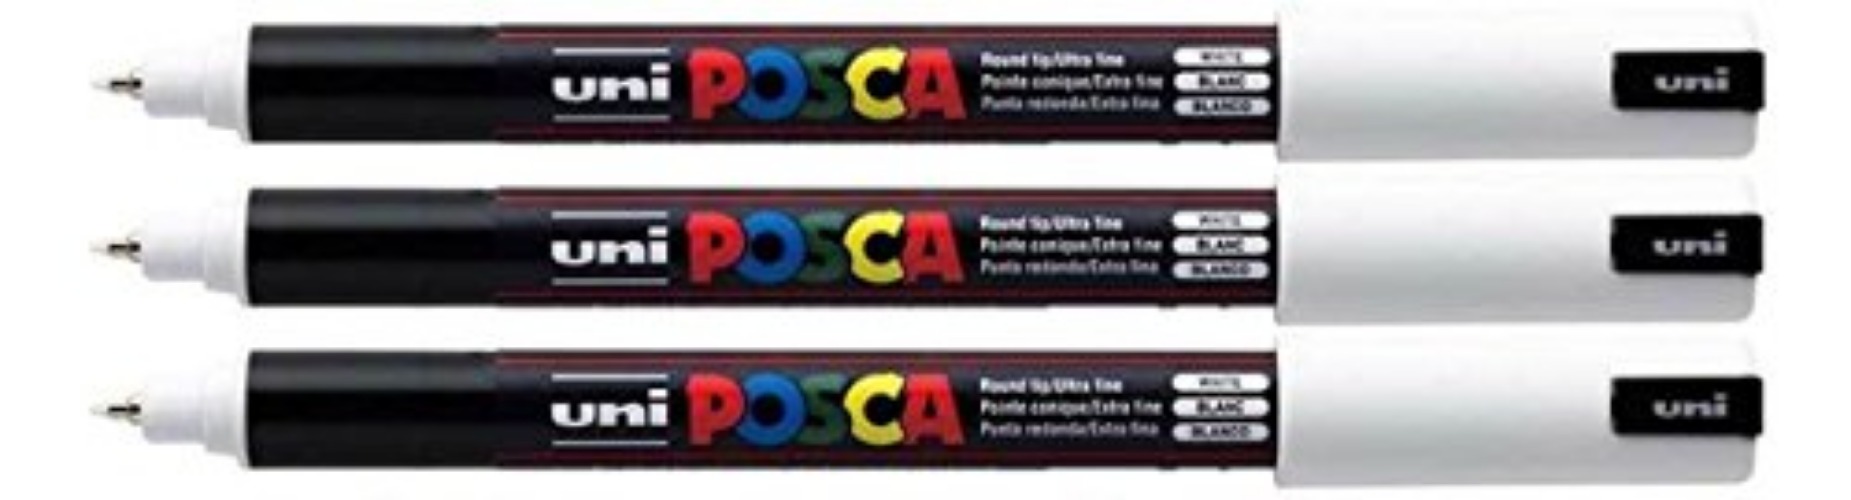 PC-1MR Uni Posca White Paint Marker Pens Ultra Fine 0.7mm Calibre Nib Tip Writes On Any Surface Fabric Glass Stone Metal Wood Plastic (Pack of 3)